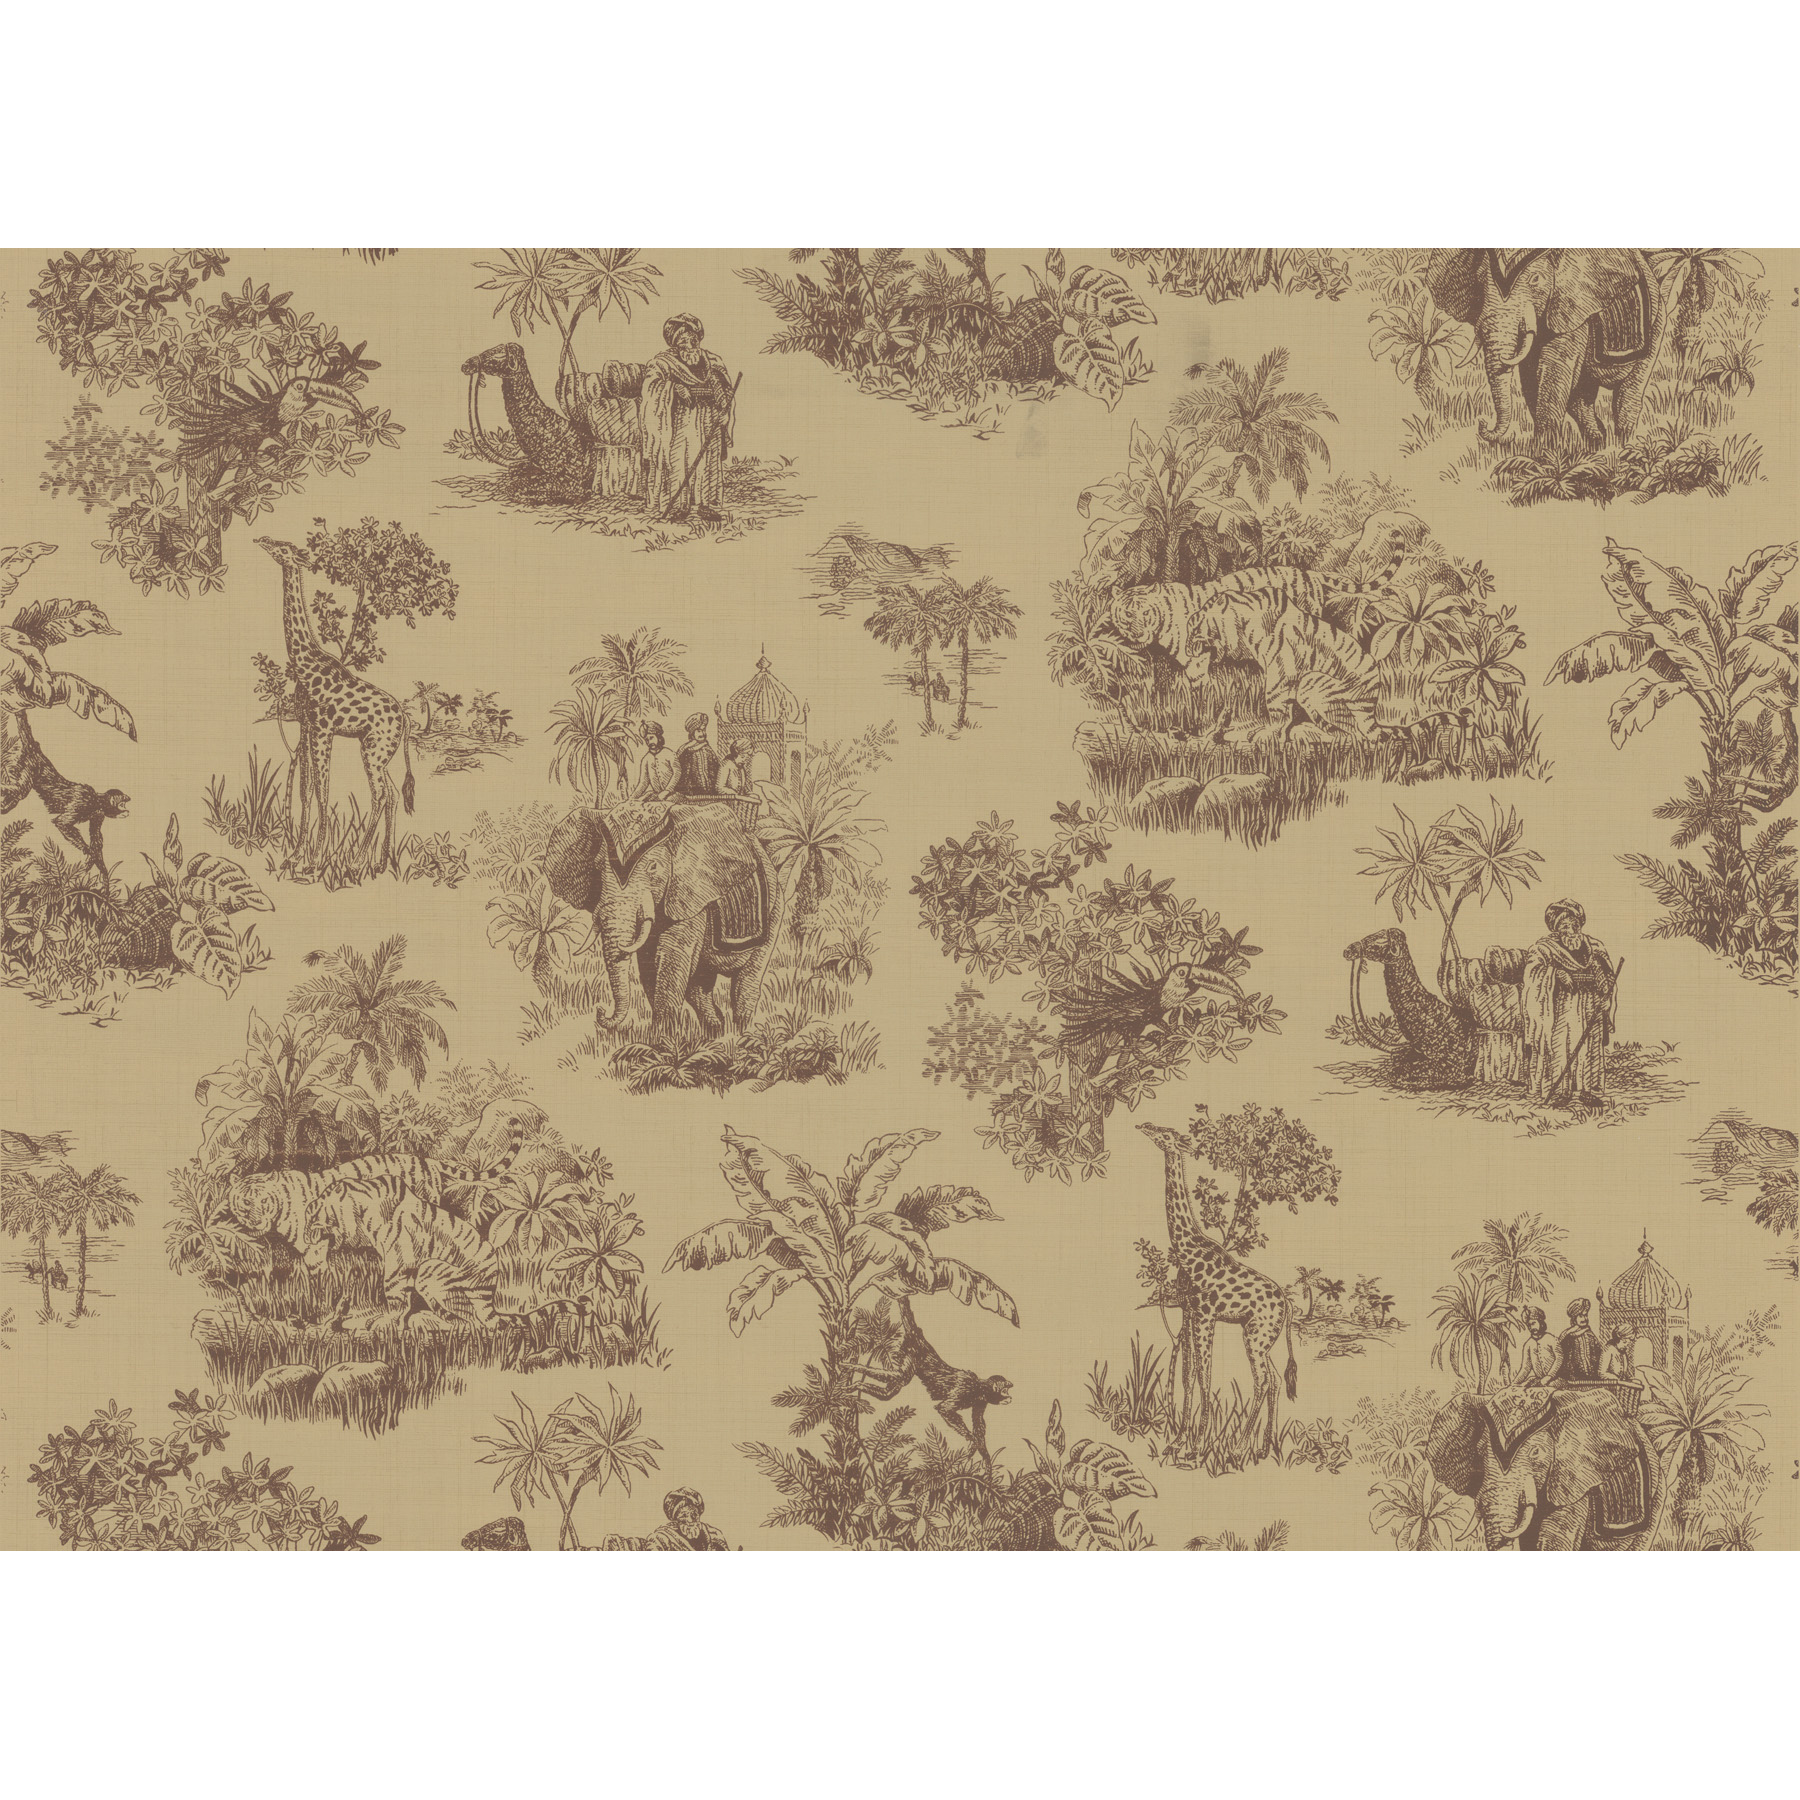 Light Brown Safari Toile Wallpaper Overstock Shopping Top Rated